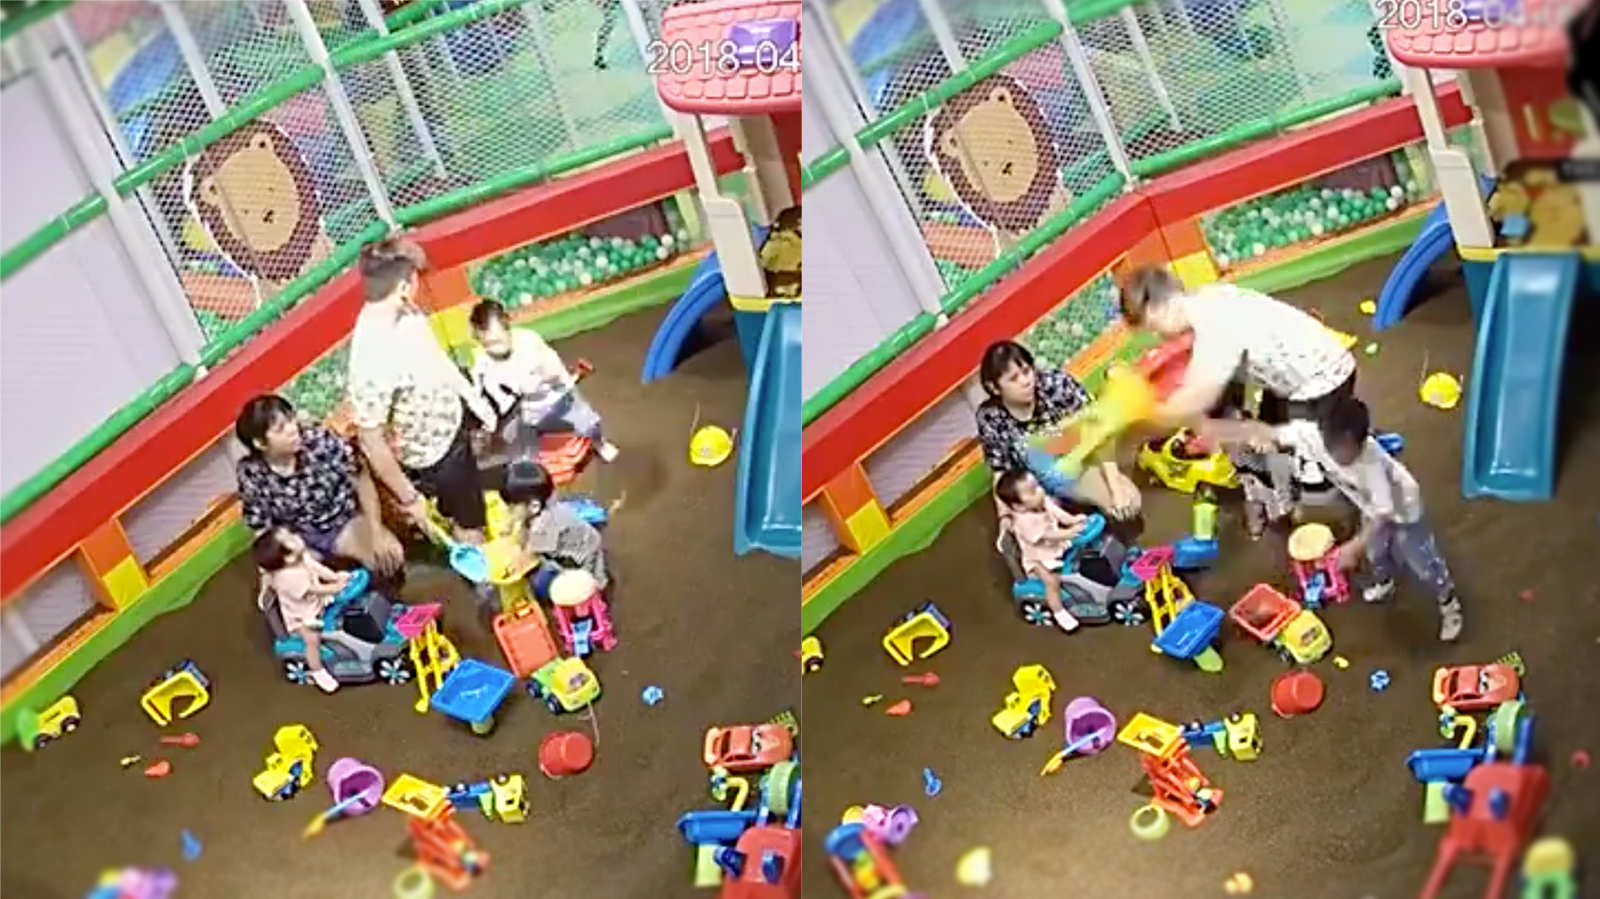 Yishun playground incident: Was that really a kick to the child or an overreaction?